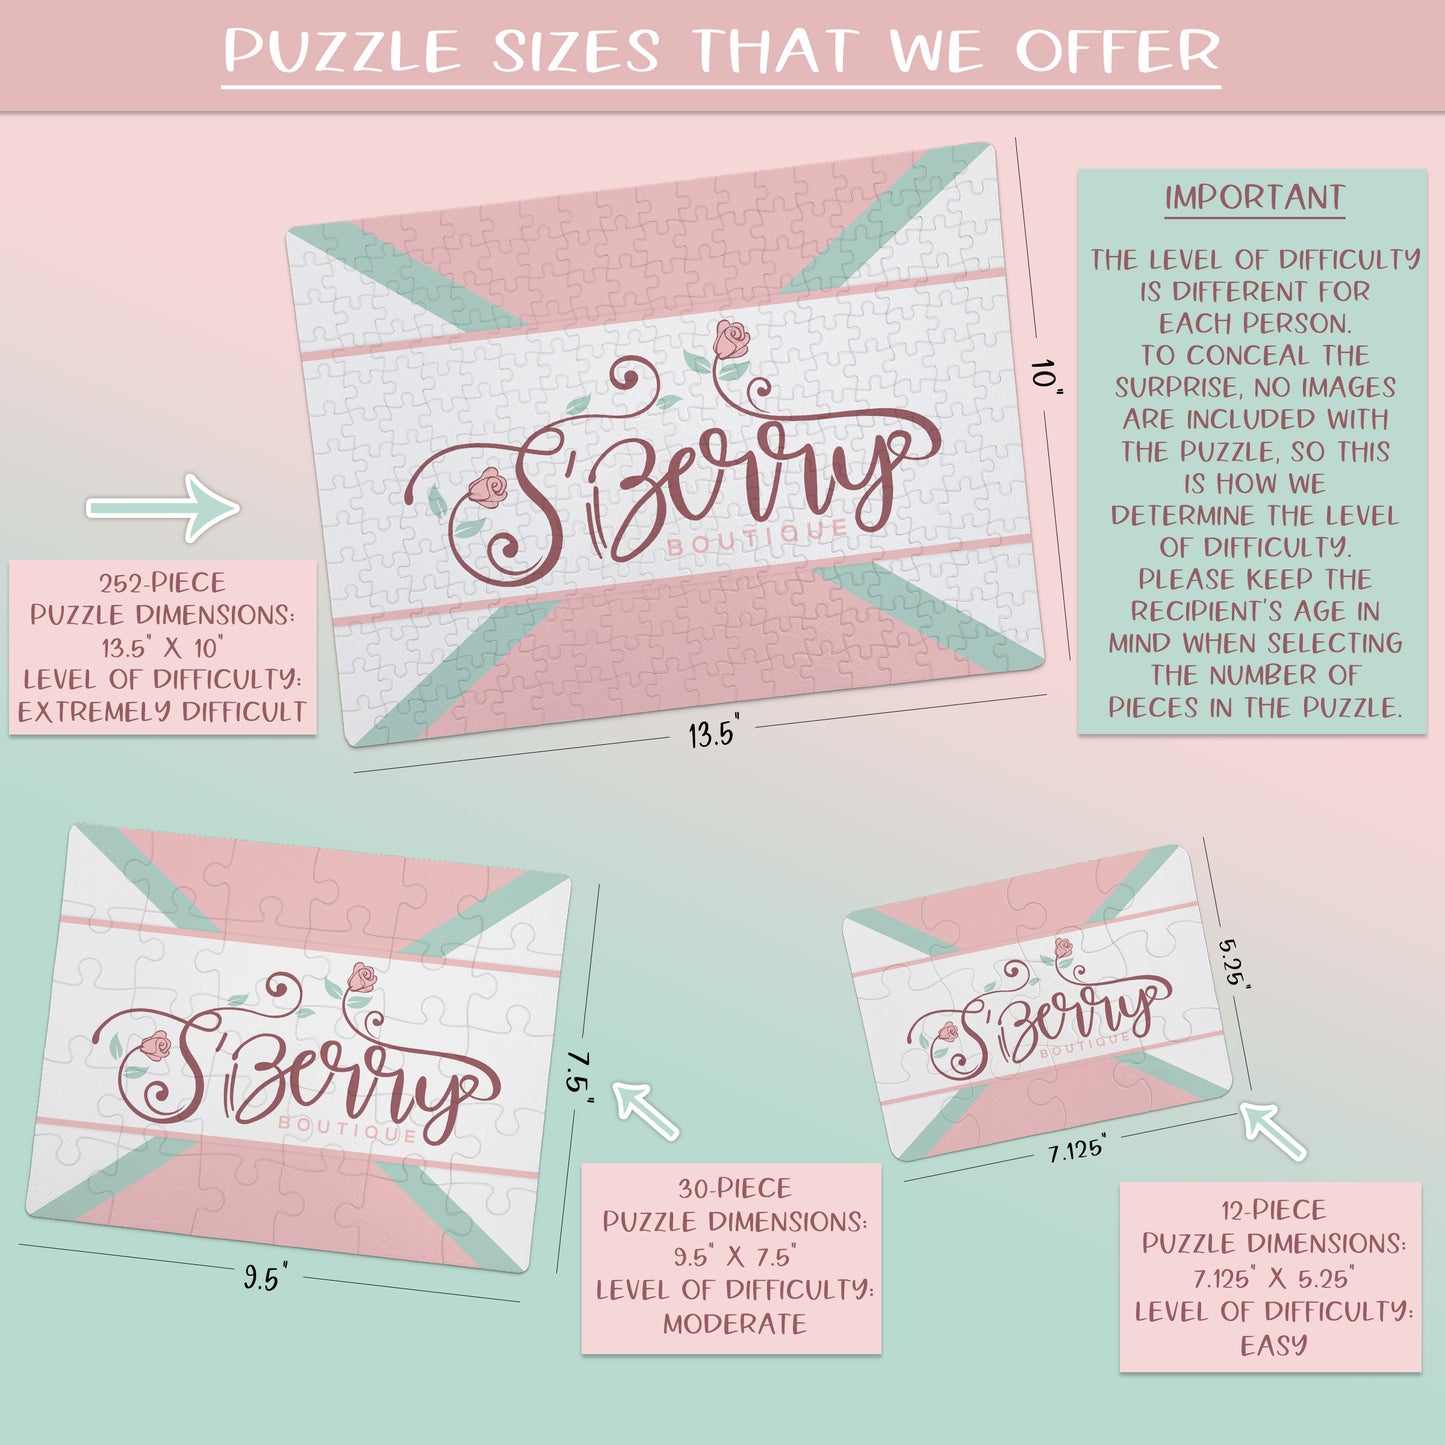 Create Your Own Puzzle - Arrow Design - CYOP0220 | S'Berry Boutique